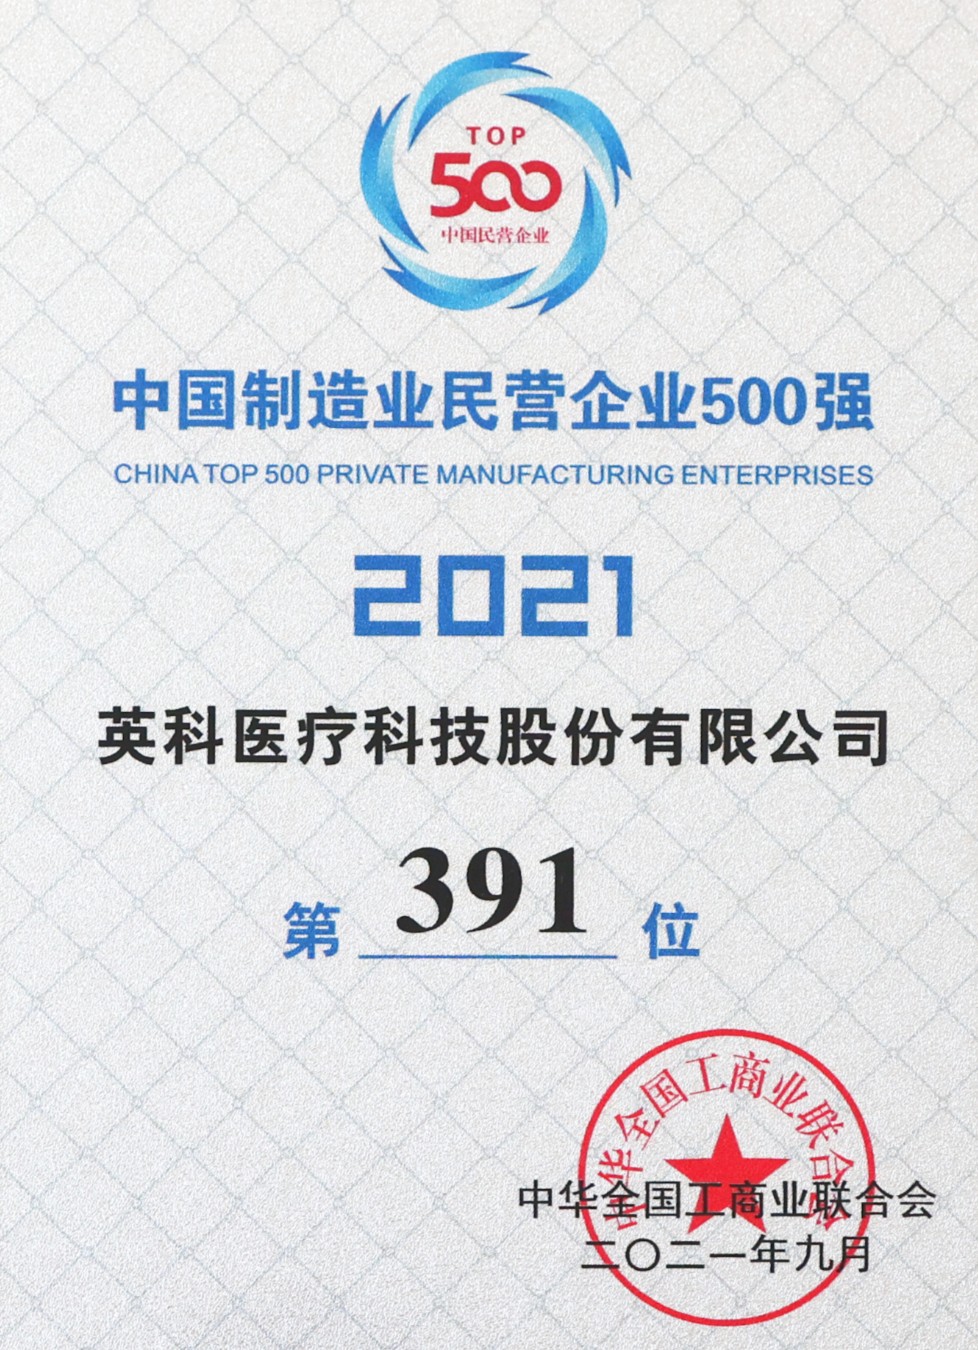 Top 500 Chinese Private Enterprises in 2021